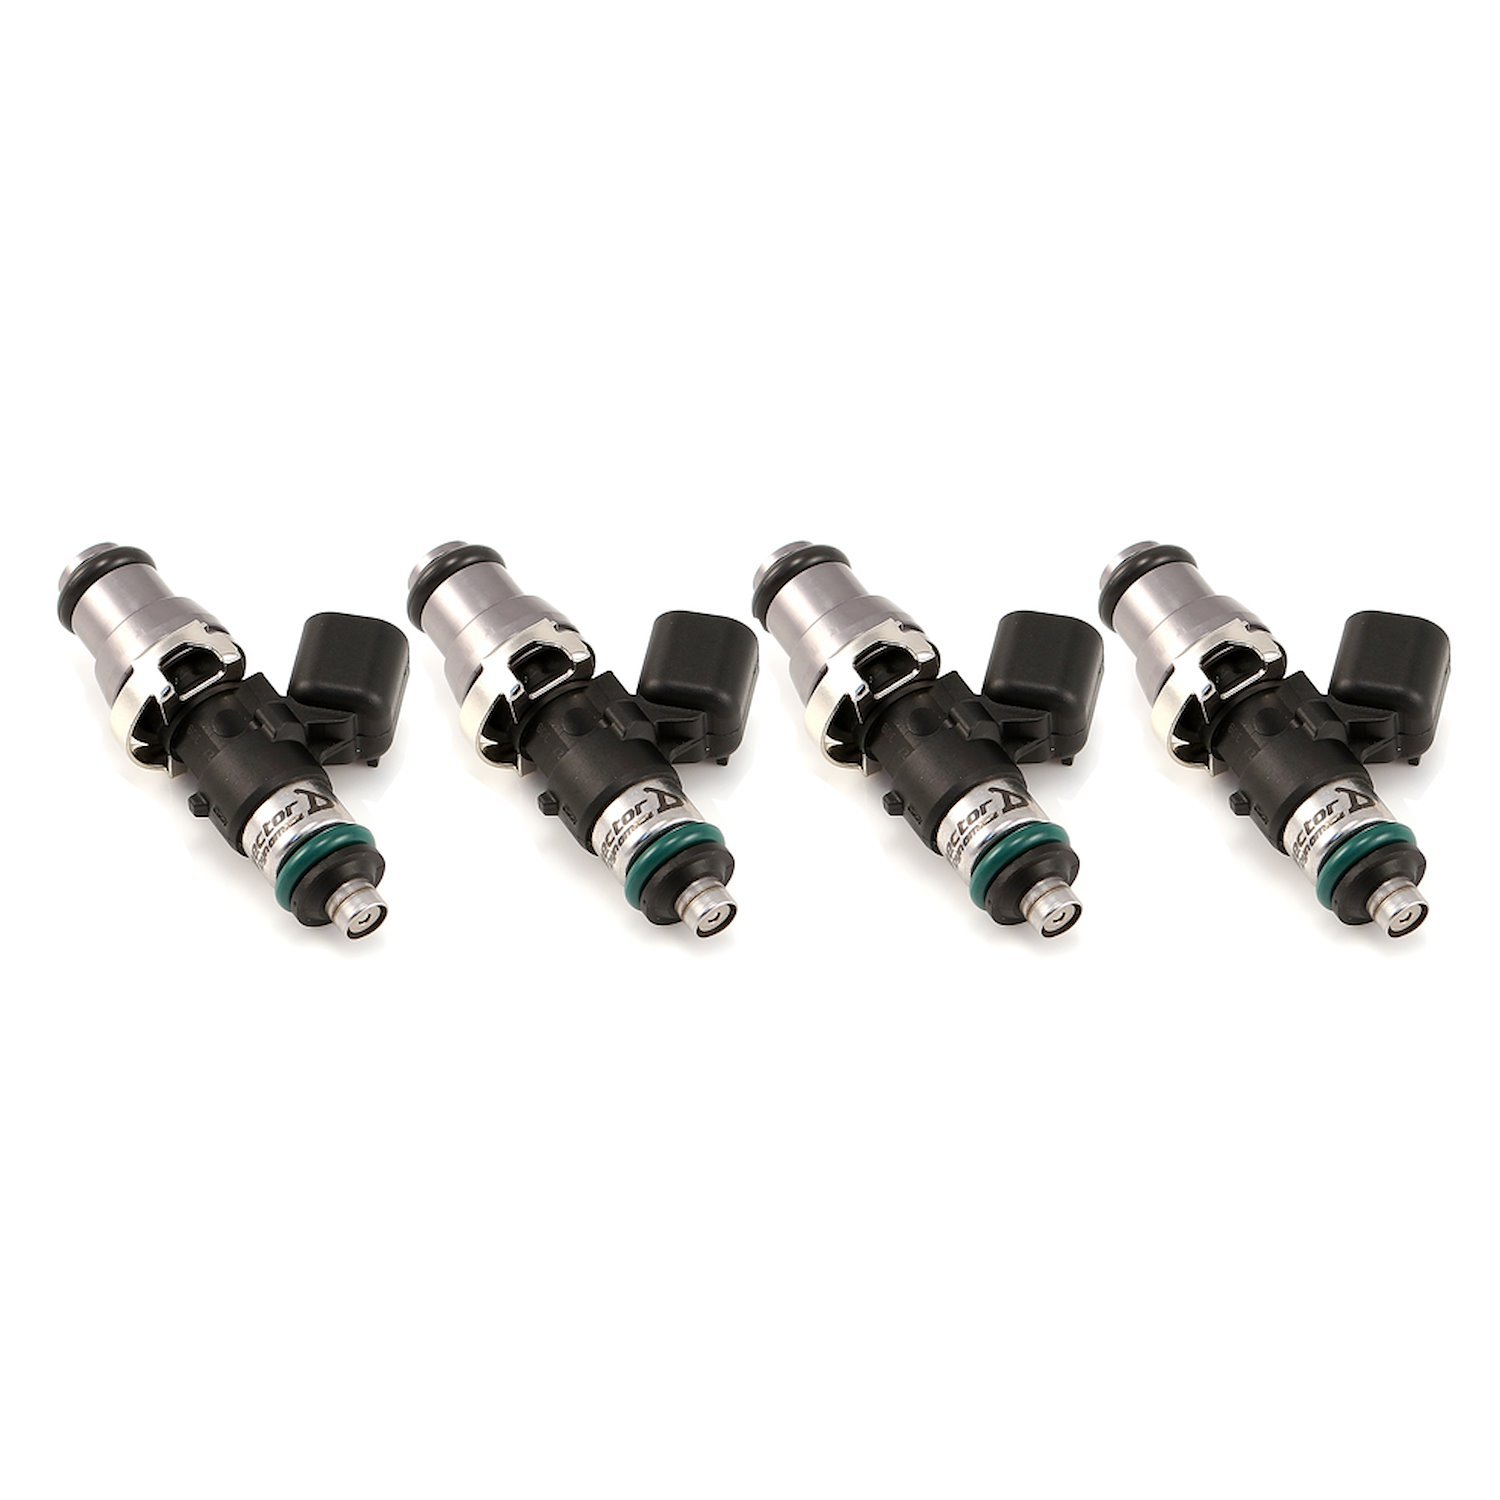 1700.48.14.14.4 1700cc Fuel Injector Set, 48 mm Length, 14 mm Top, 14 mm Lower O-Ring